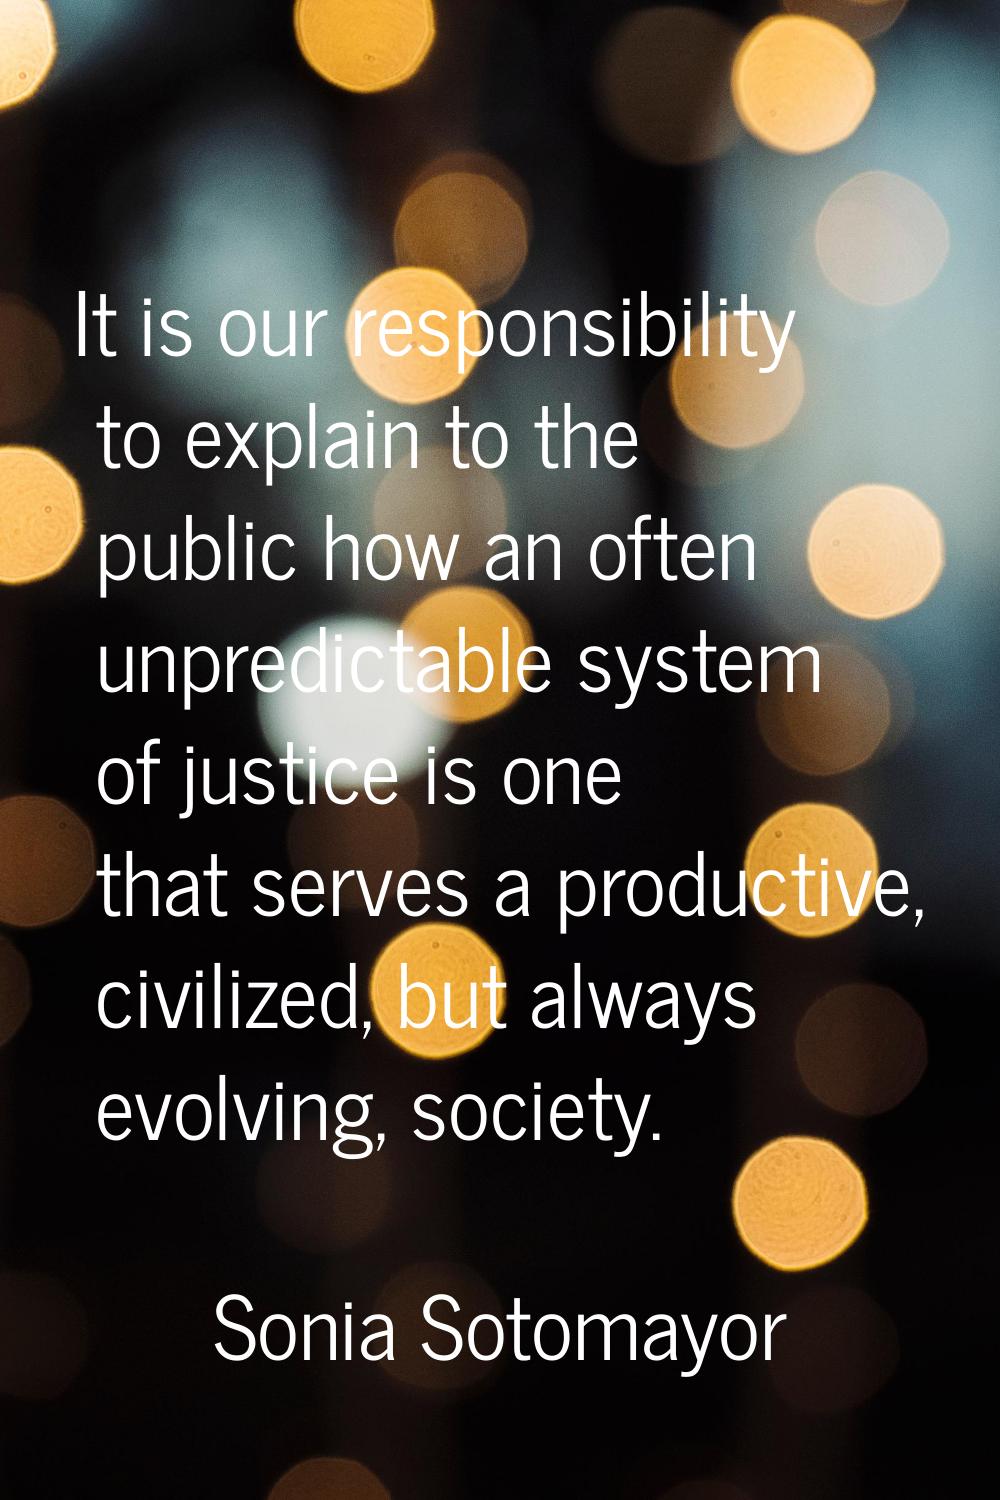 It is our responsibility to explain to the public how an often unpredictable system of justice is o